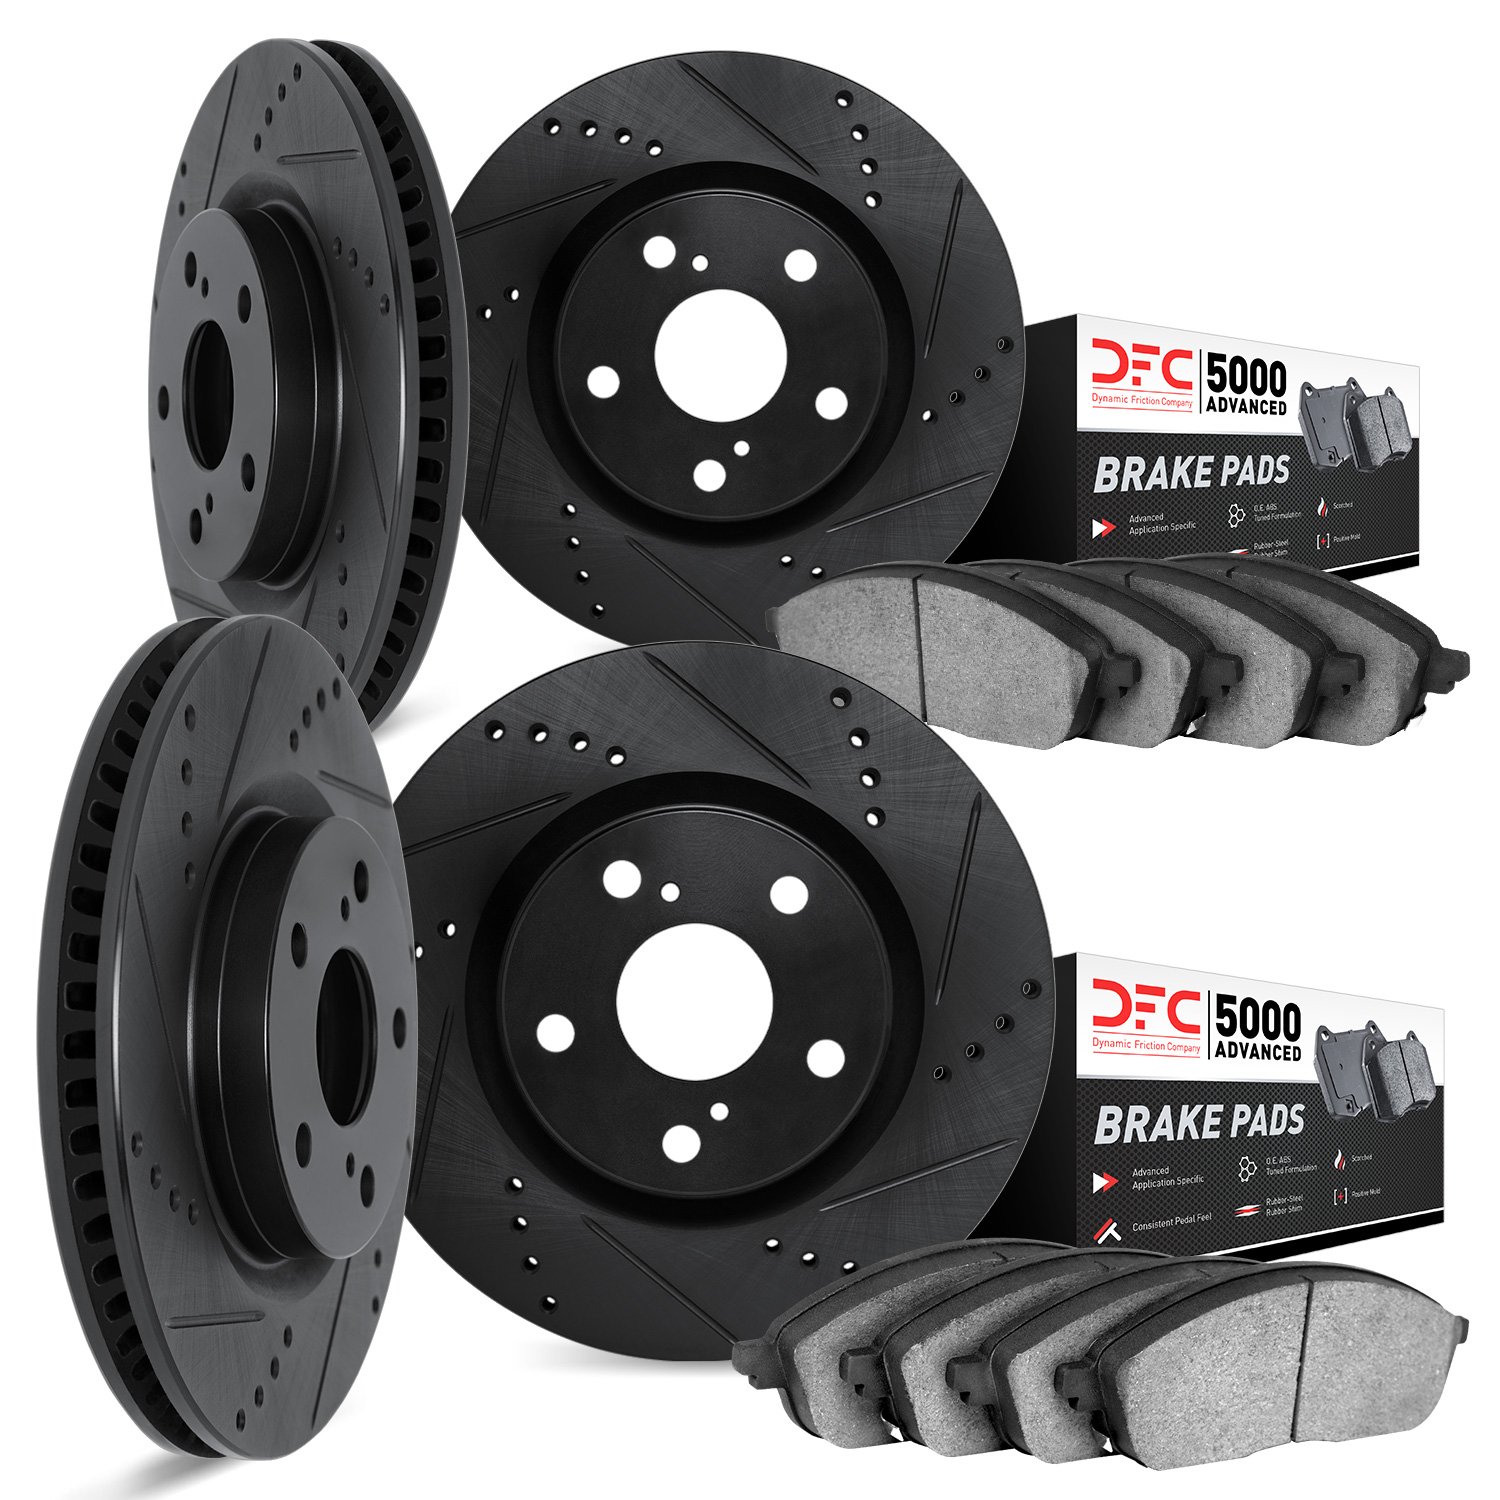 8504-46016 Drilled/Slotted Brake Rotors w/5000 Advanced Brake Pads Kit [Black], 2005-2008 GM, Position: Front and Rear